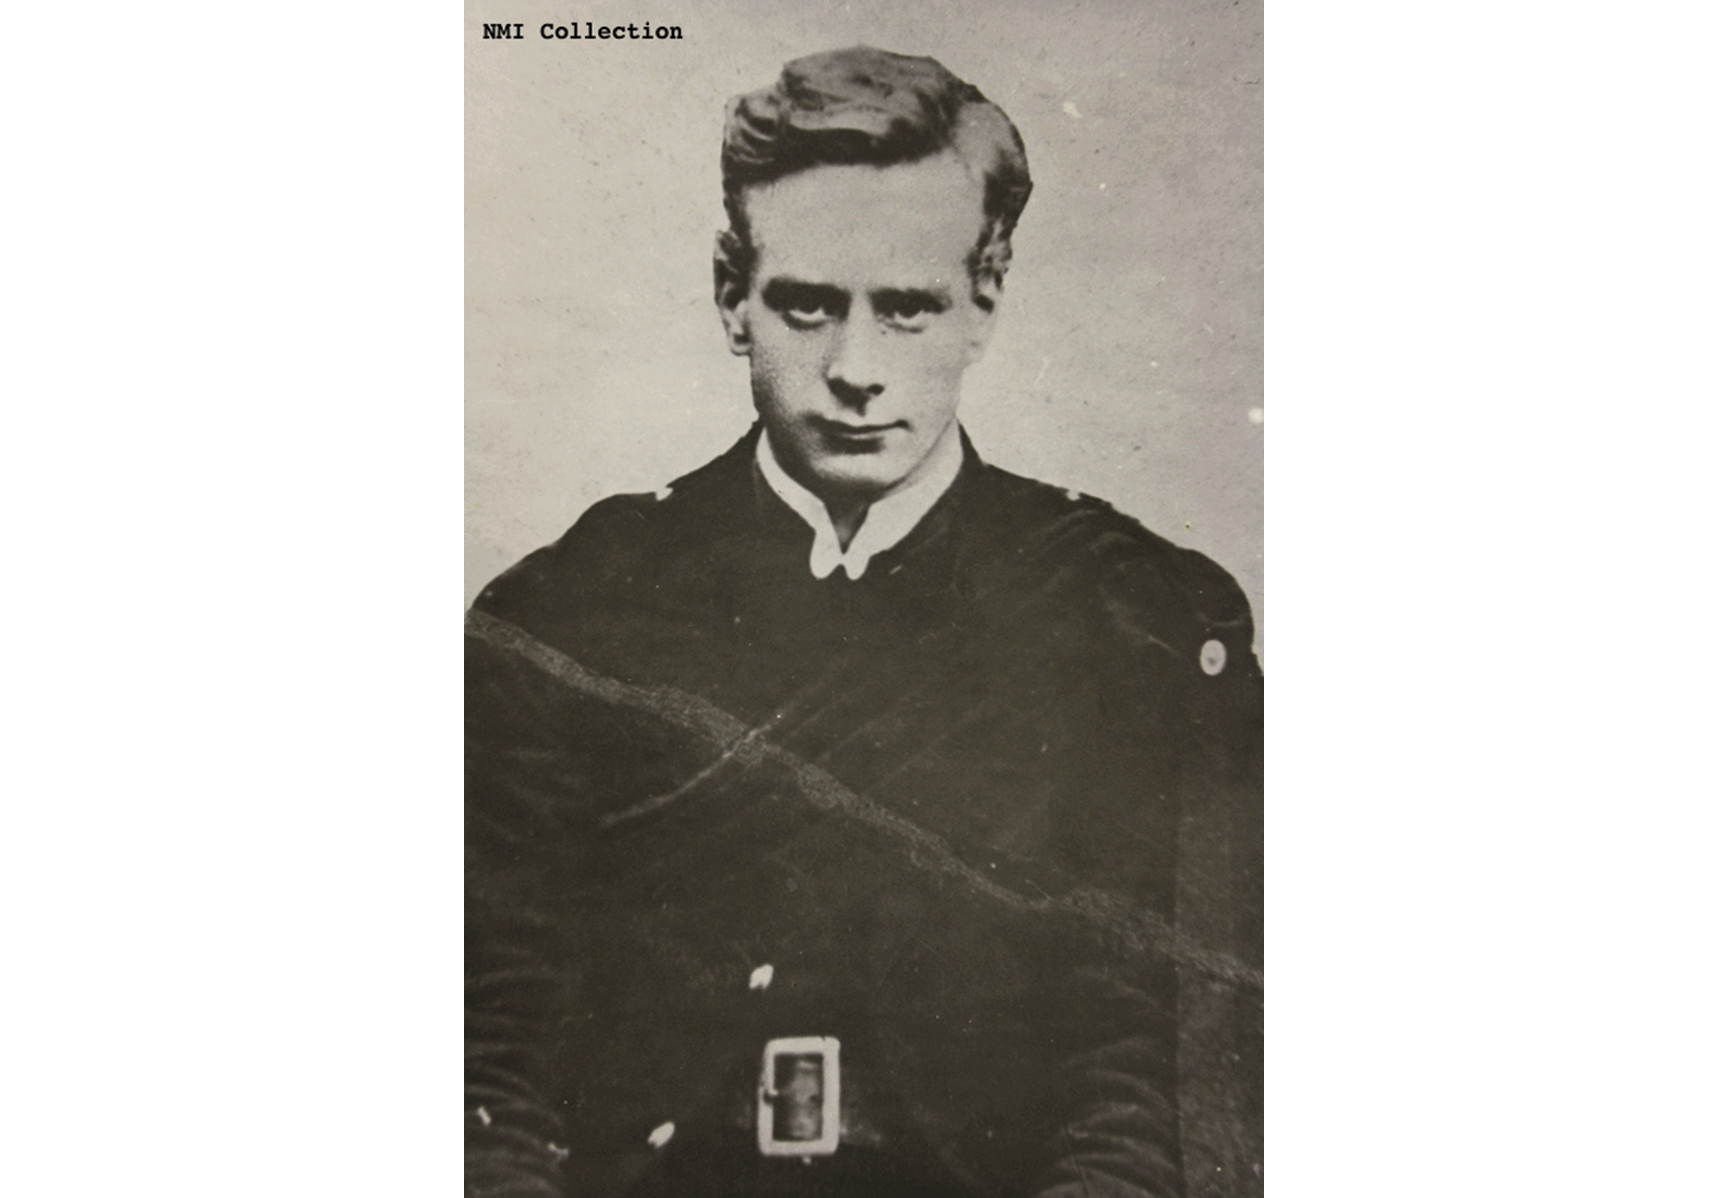 Liam Mellows who led the men in the West of Ireland during the Rising and became the director of supplies for the IRA during the War of  Independence.